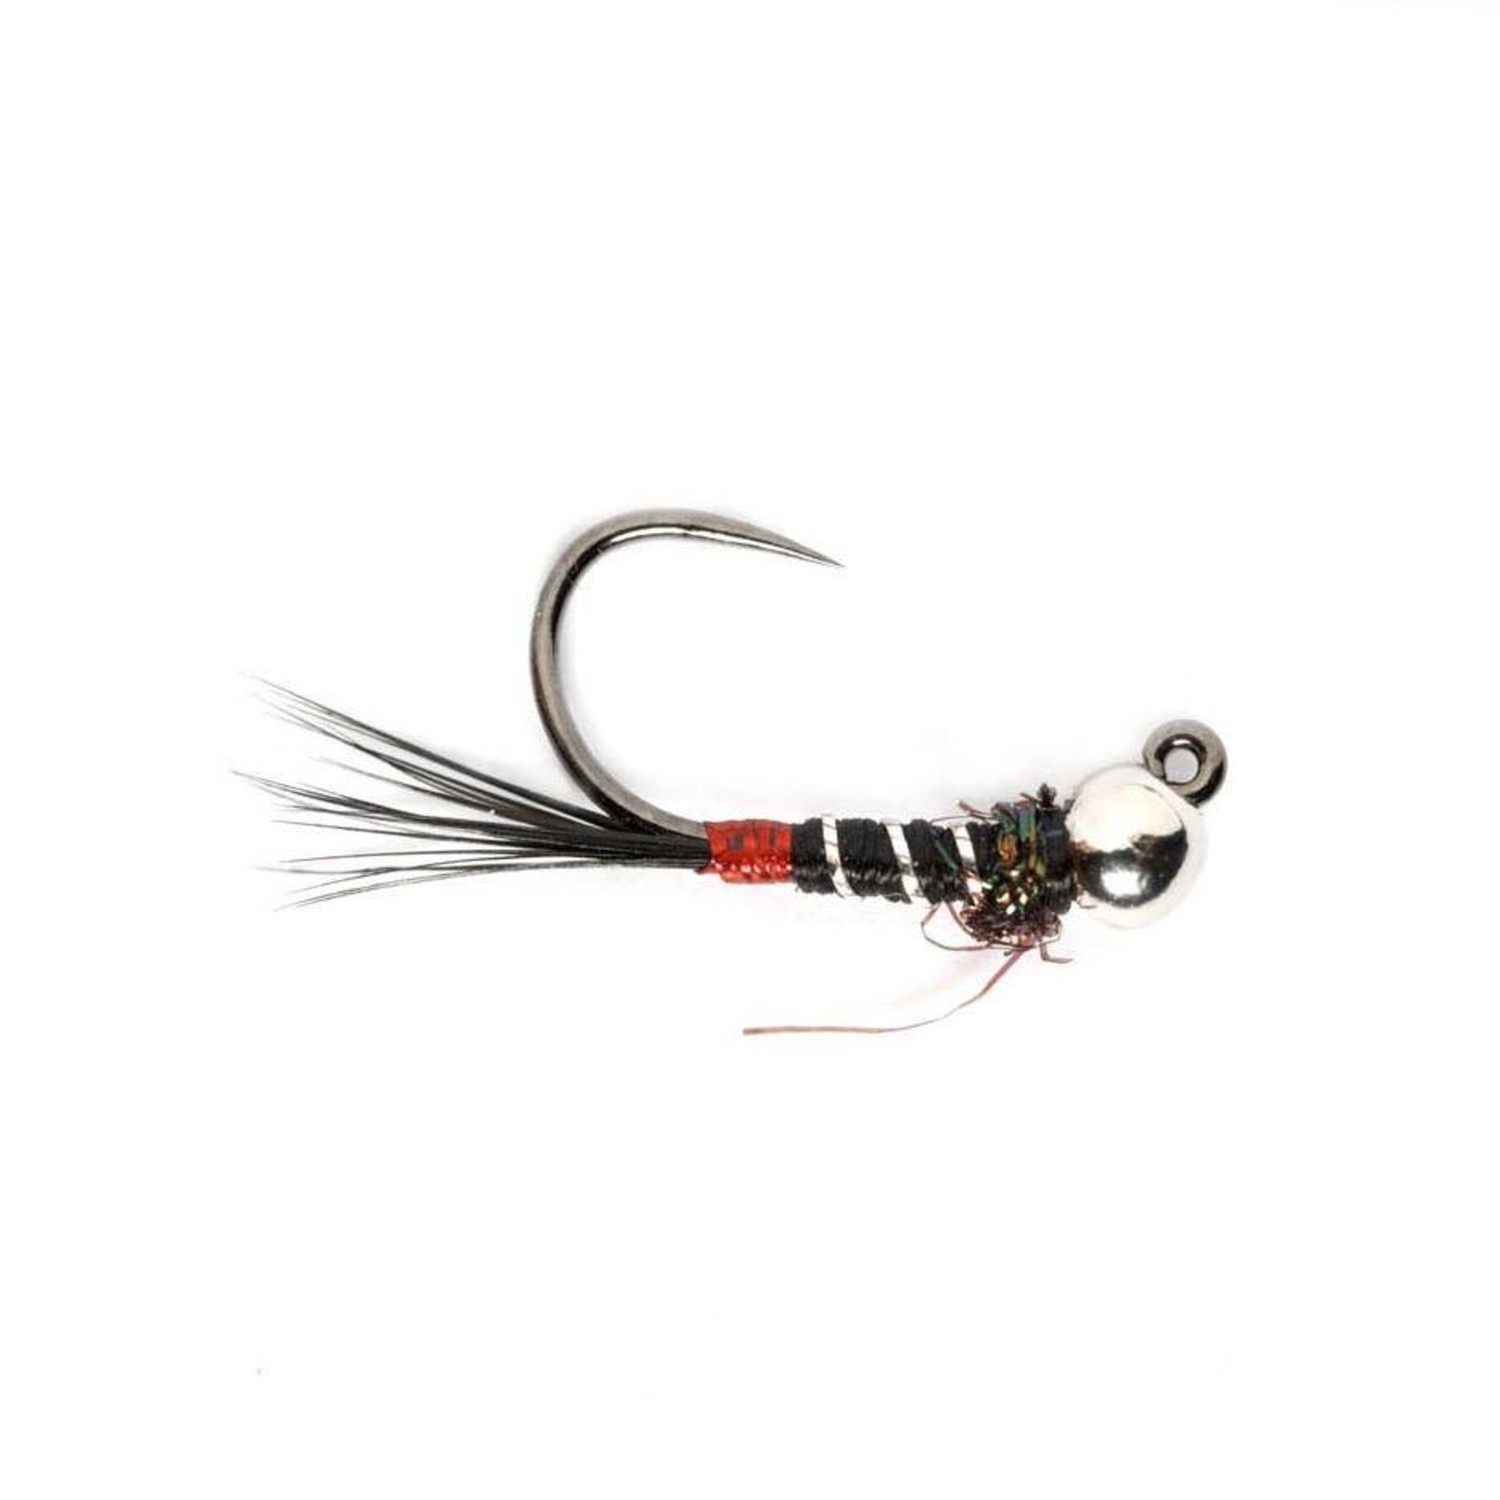 The French Nymph Jig - Royal Treatment Fly Fishing